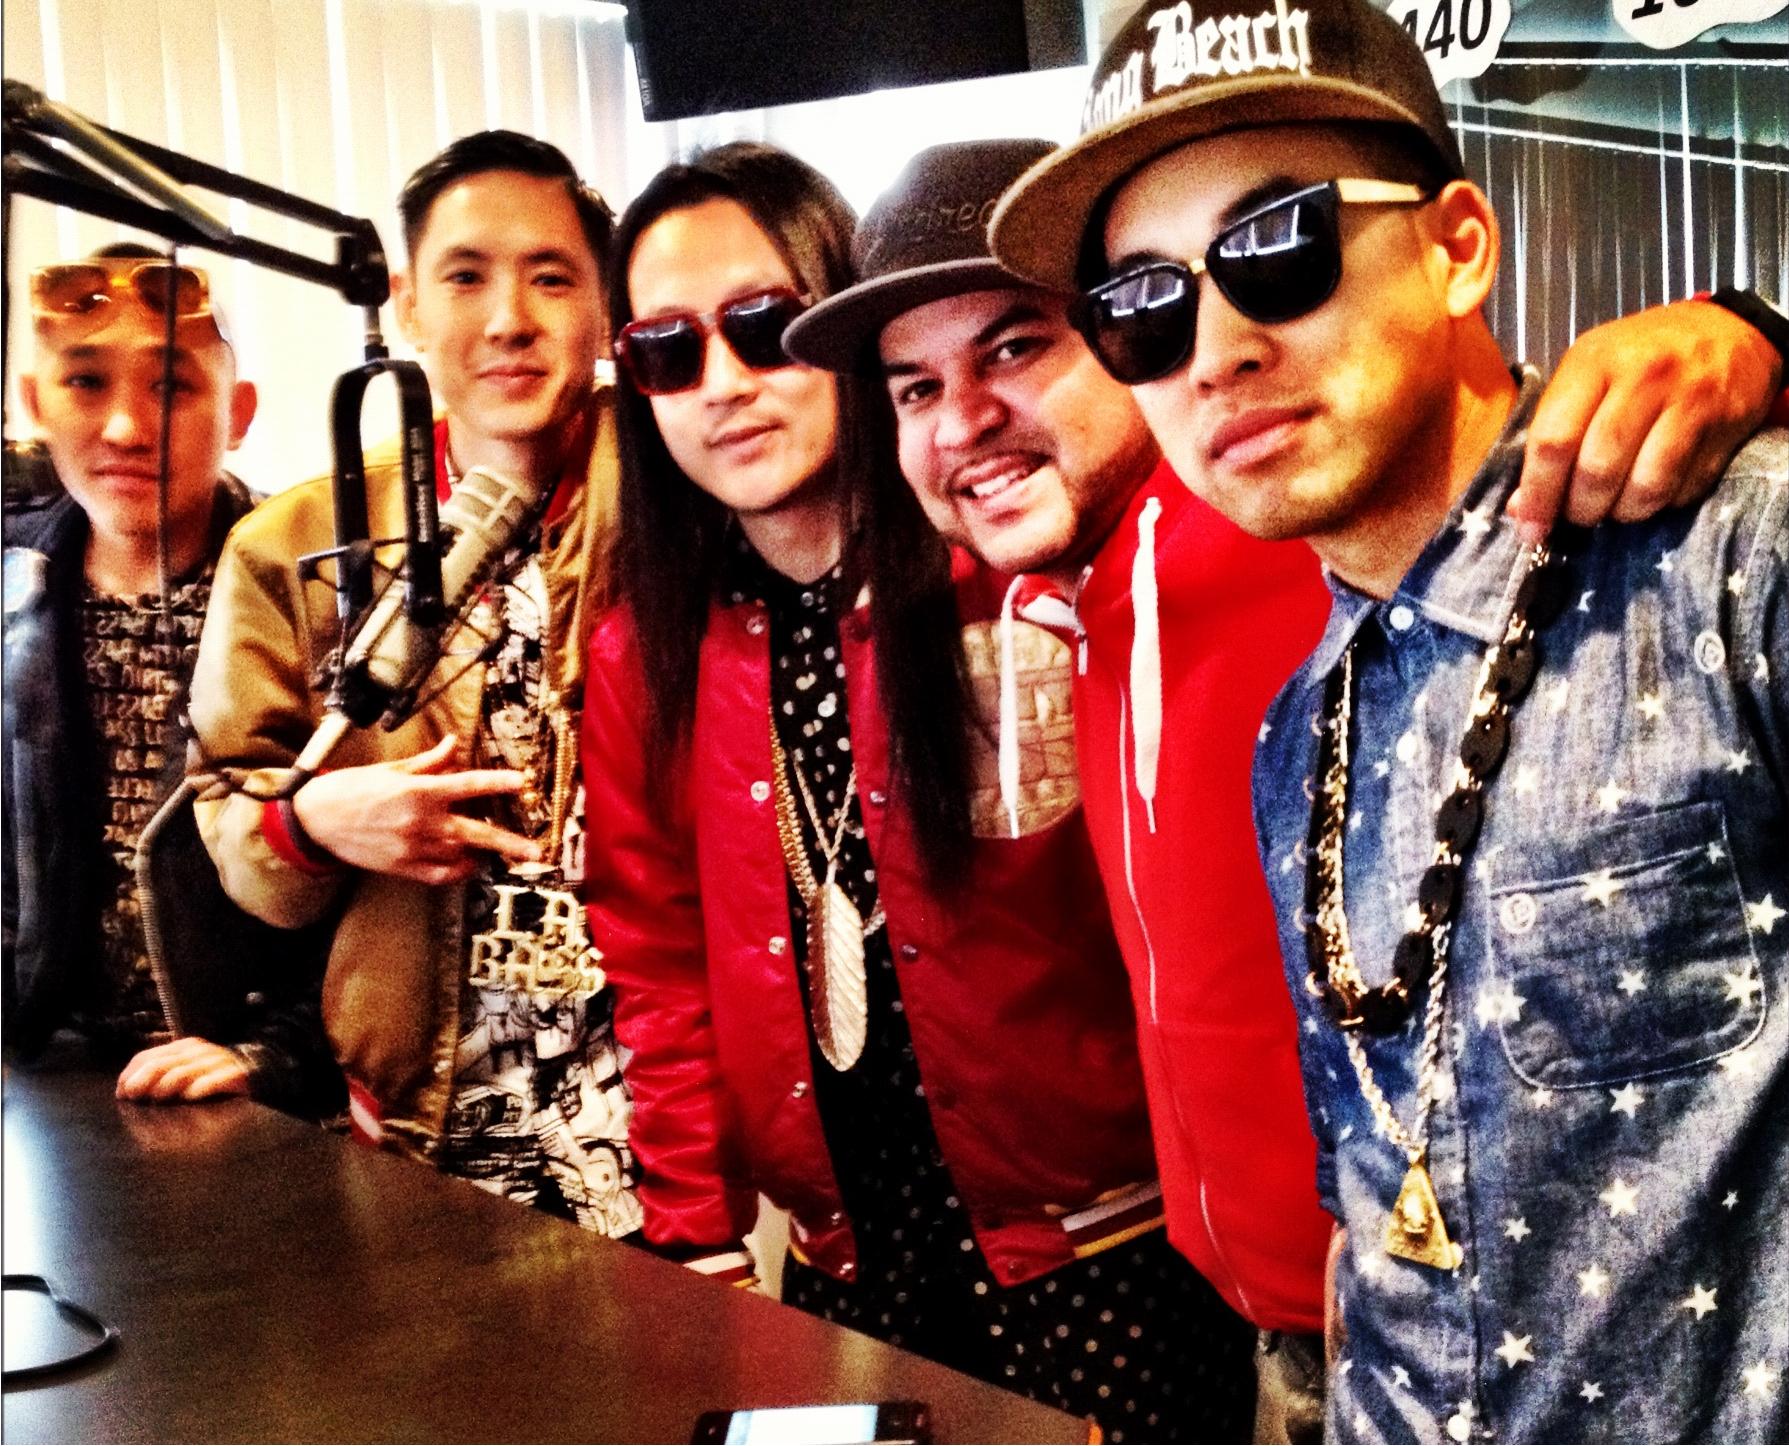 Far East Movement stops by KFYV